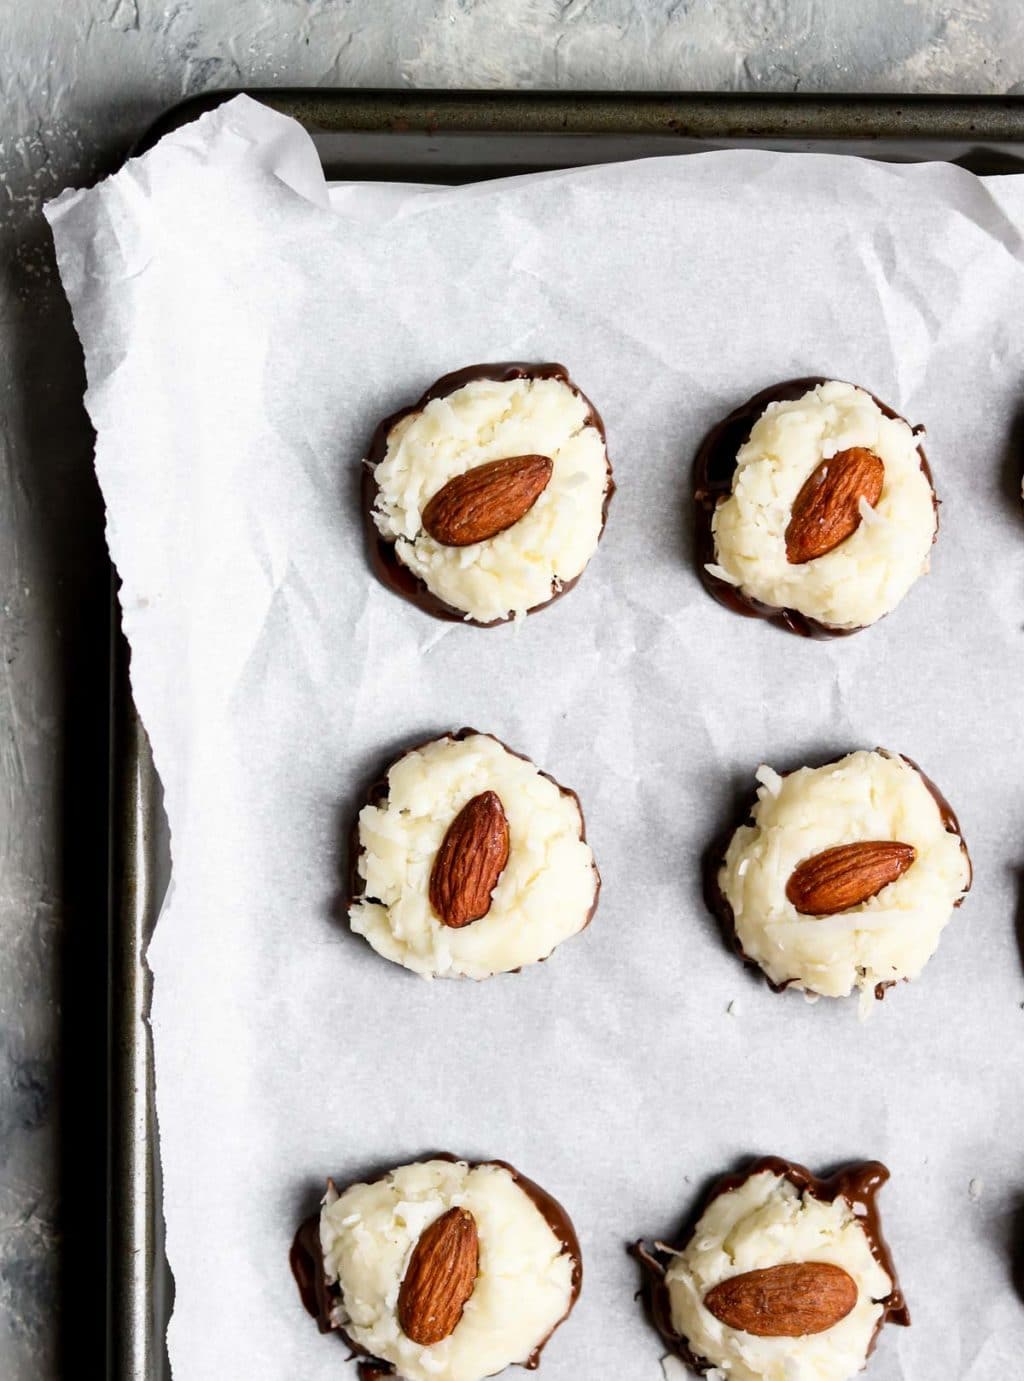 No Bake Almond Joy Cookies on a baking sheet lined with parchment paper